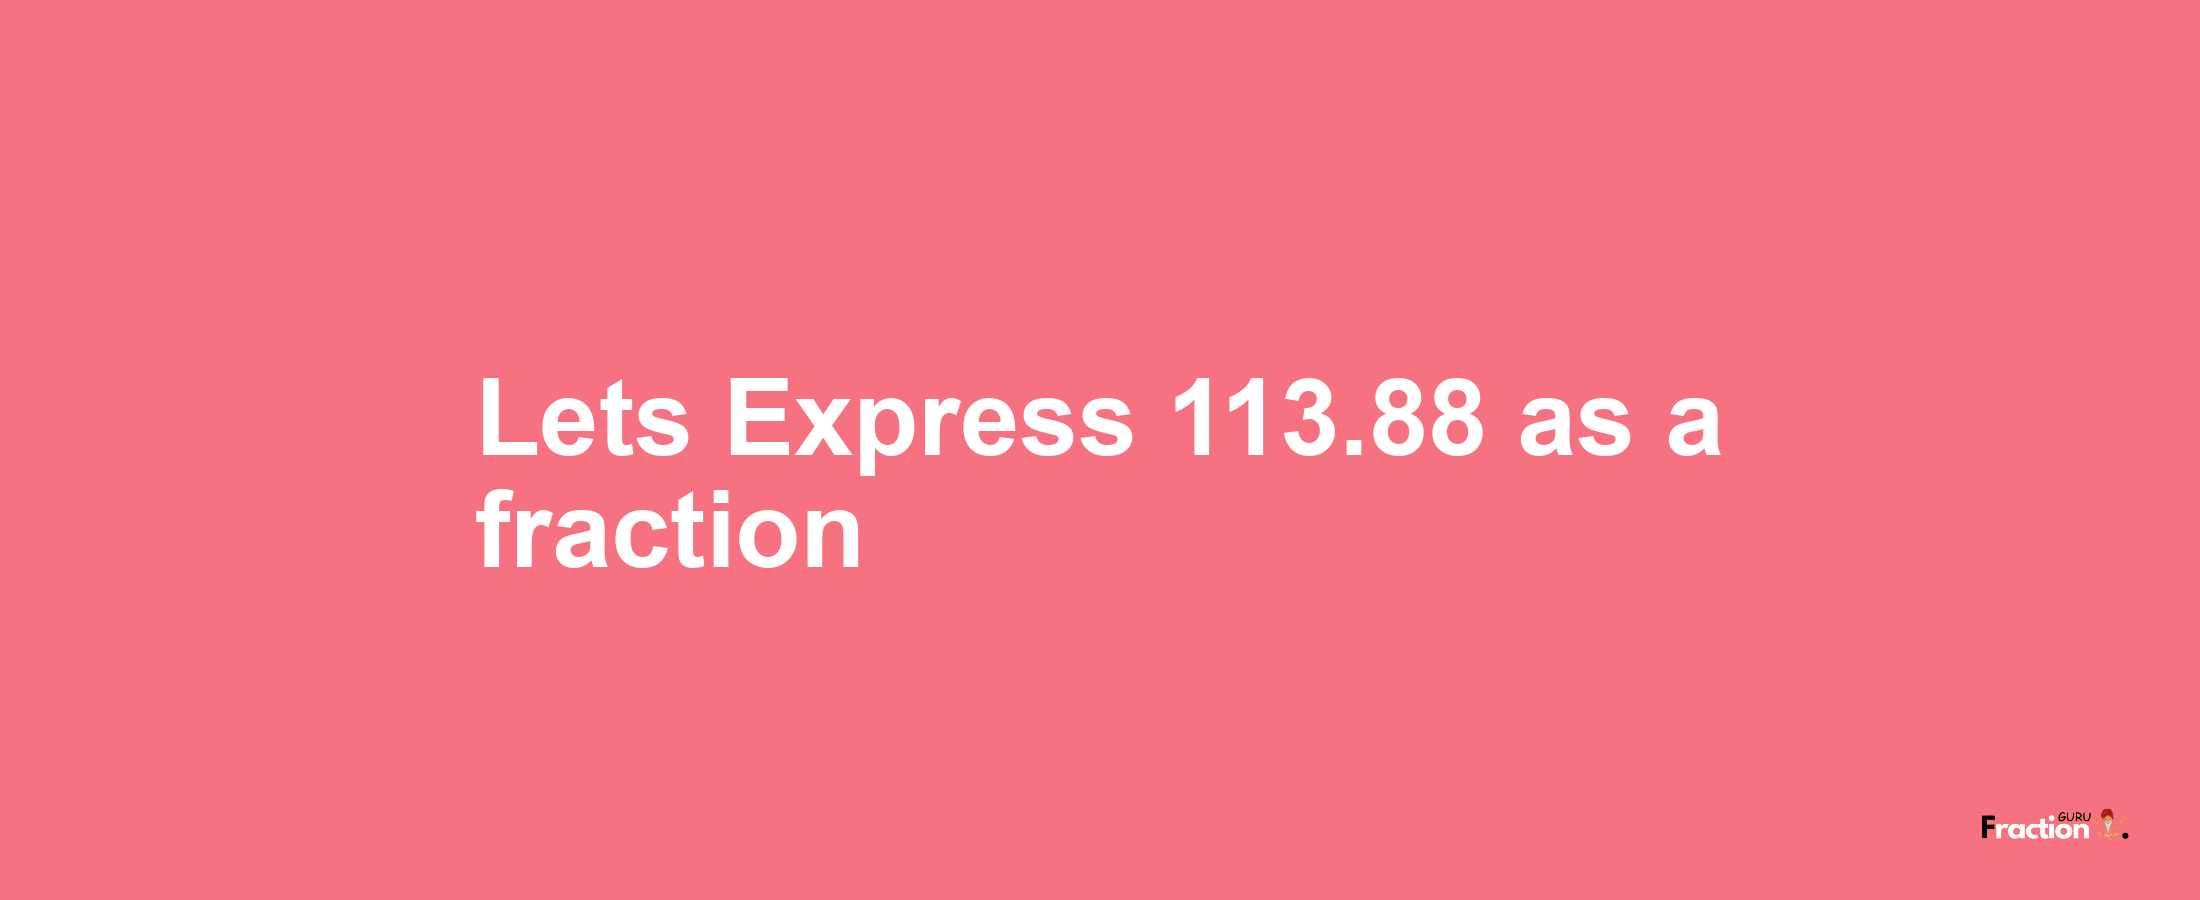 Lets Express 113.88 as afraction